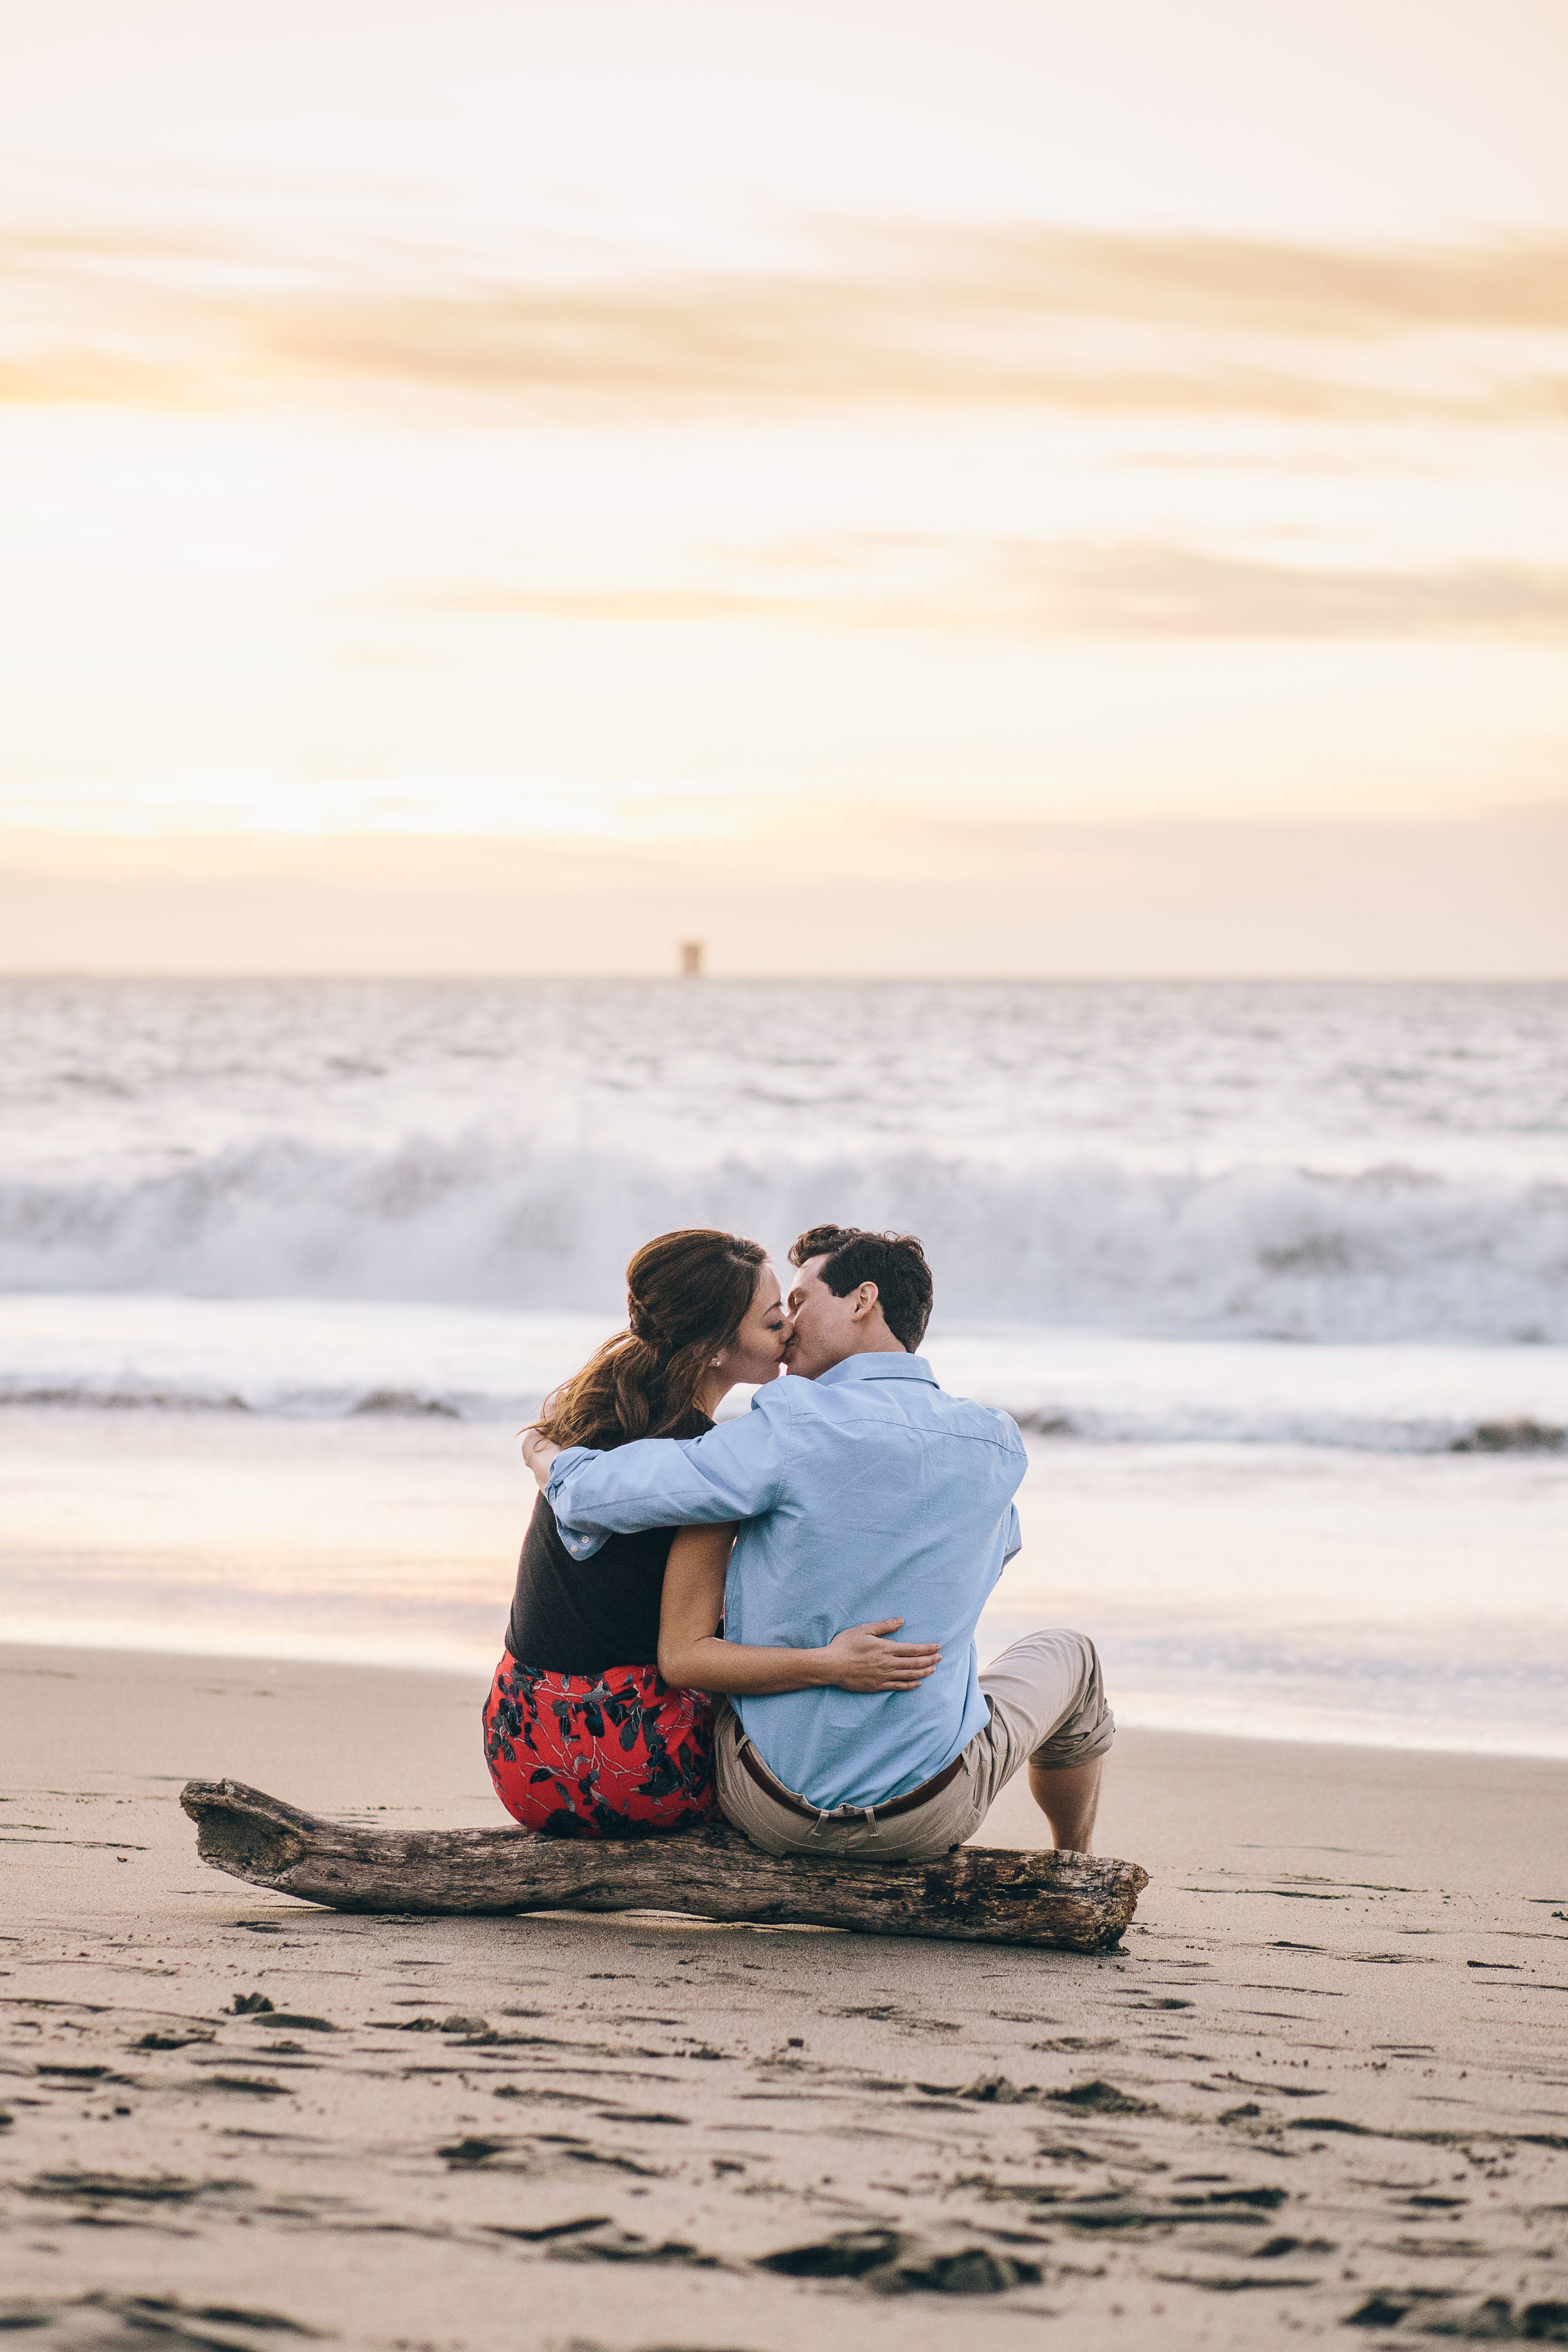 Best Engagement Photo Locations in San Francisco - Baker Beach Engagement Photos by JBJ Pictures (8).jpg